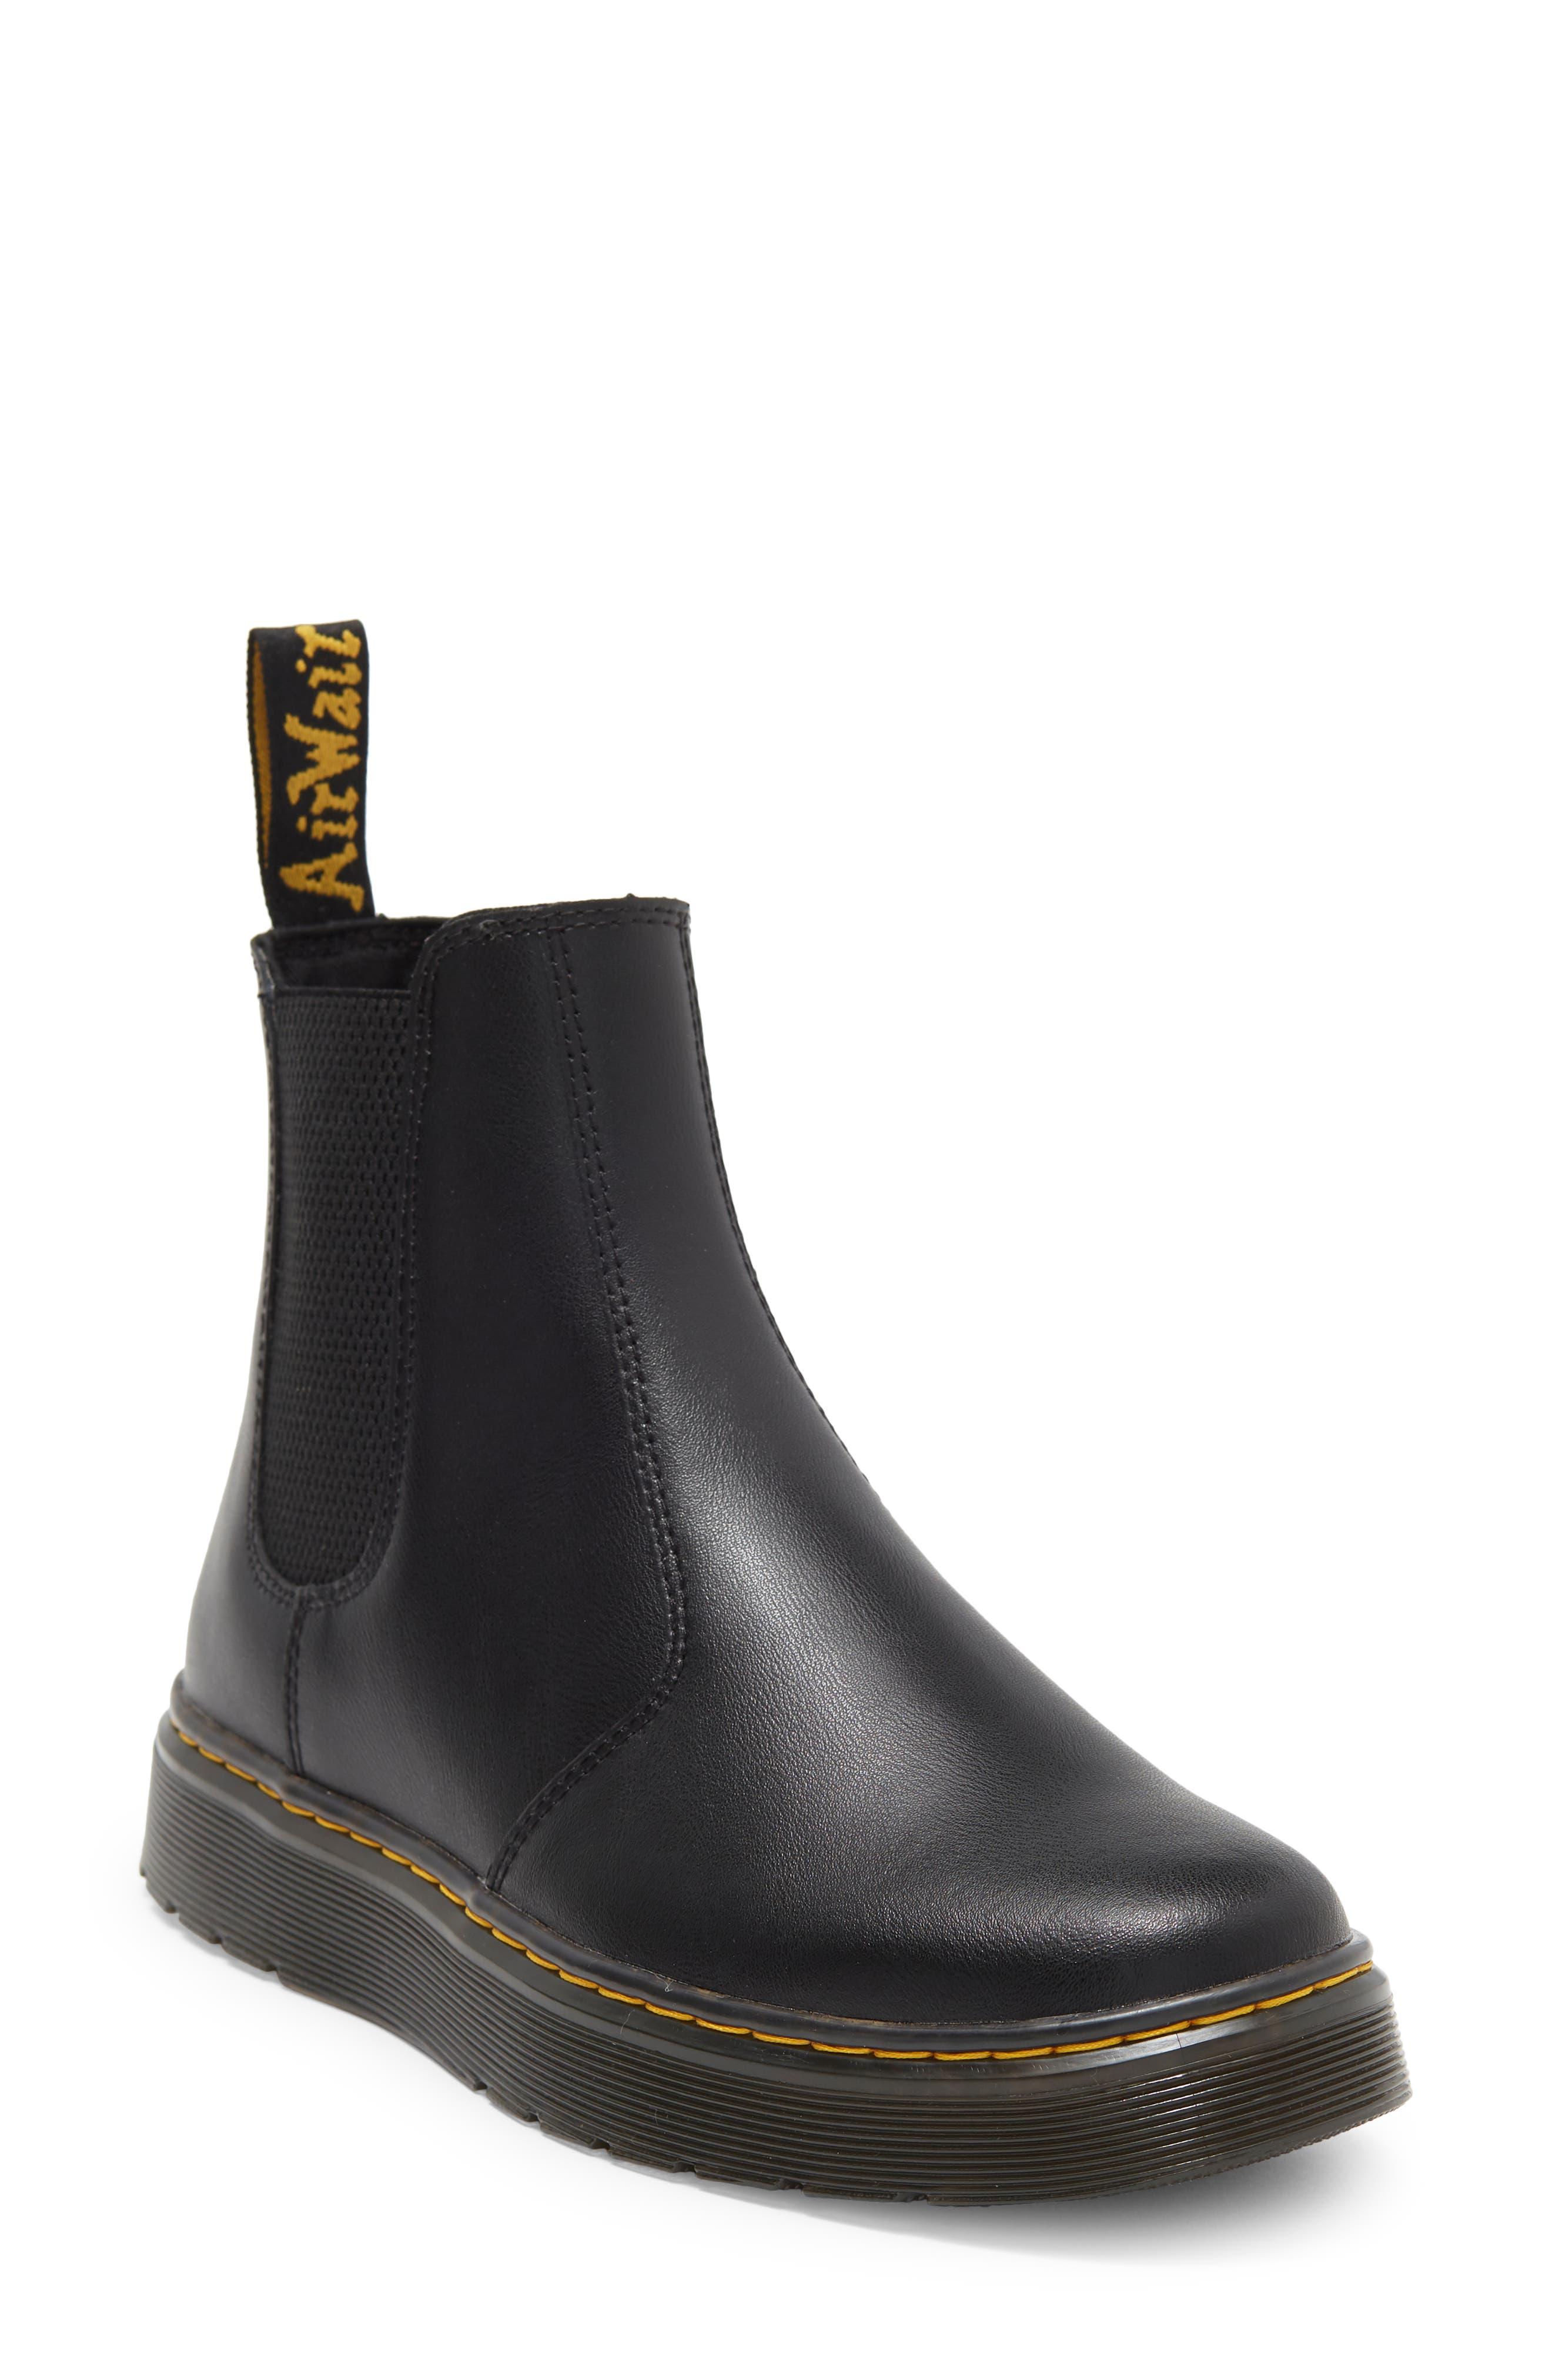 Dr. Martens Dorian Chelsea Leather Boot in Black | Lyst